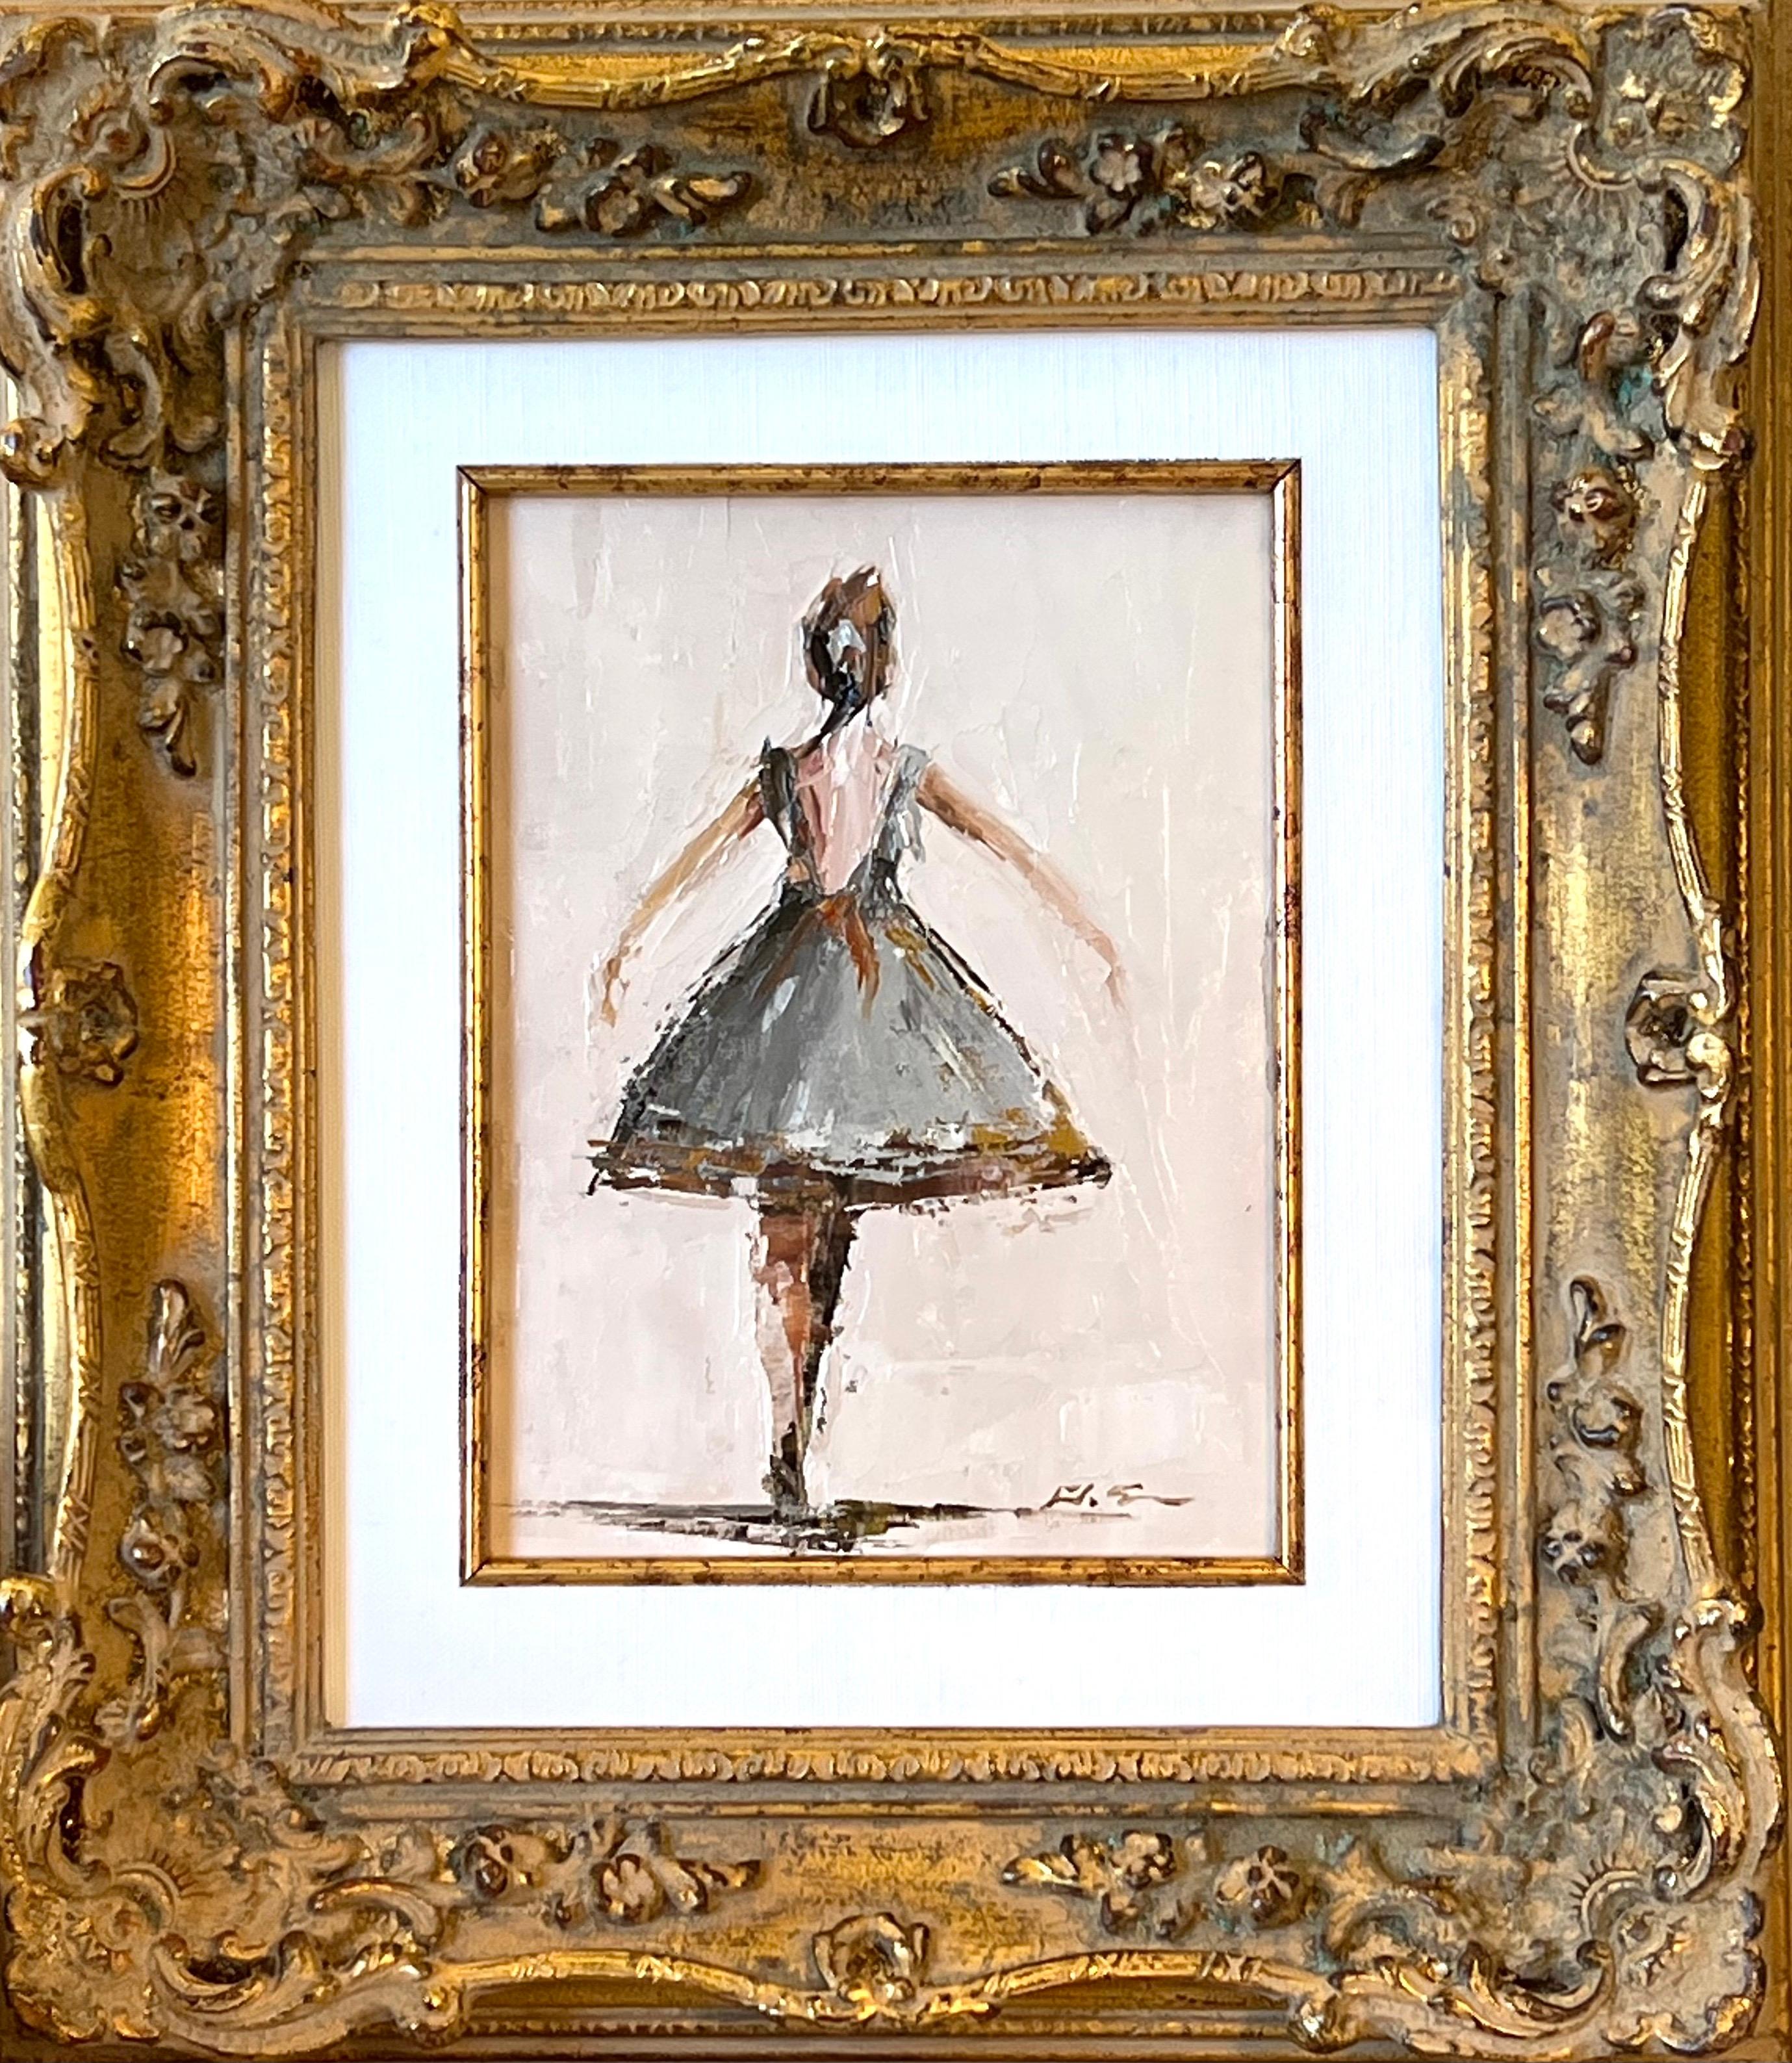 'Pose' is a petite framed oil on canvas Impressionist painting created by American artist Geri Eubanks in 2022. Featuring a soft palette made of grey, off-white, neutral and black tones, this small figurative painting captures our hearts with its